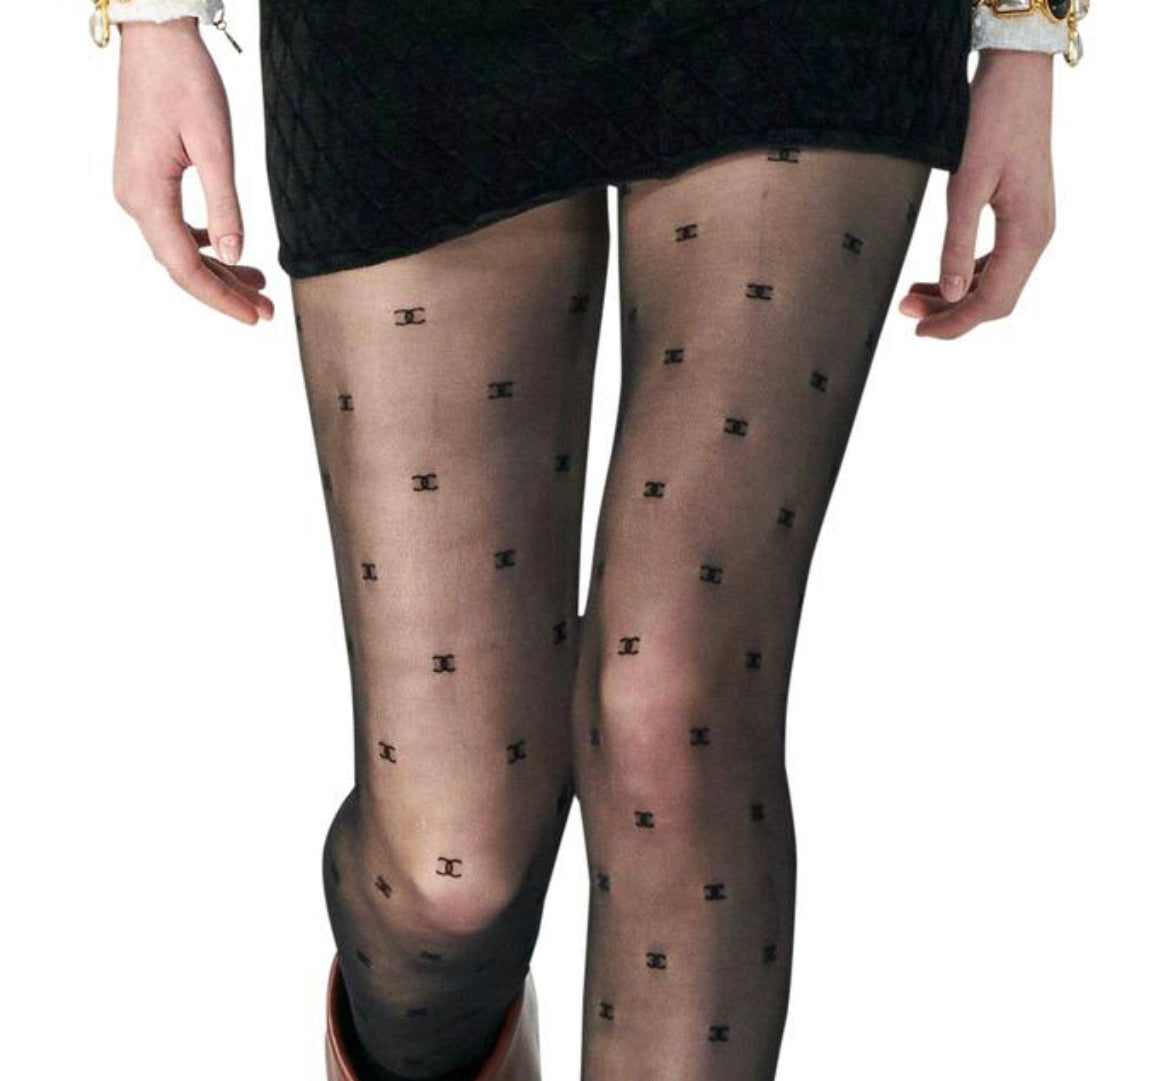 Chanel Black CC Runway Tights Hosiery Sold Out Everywhere